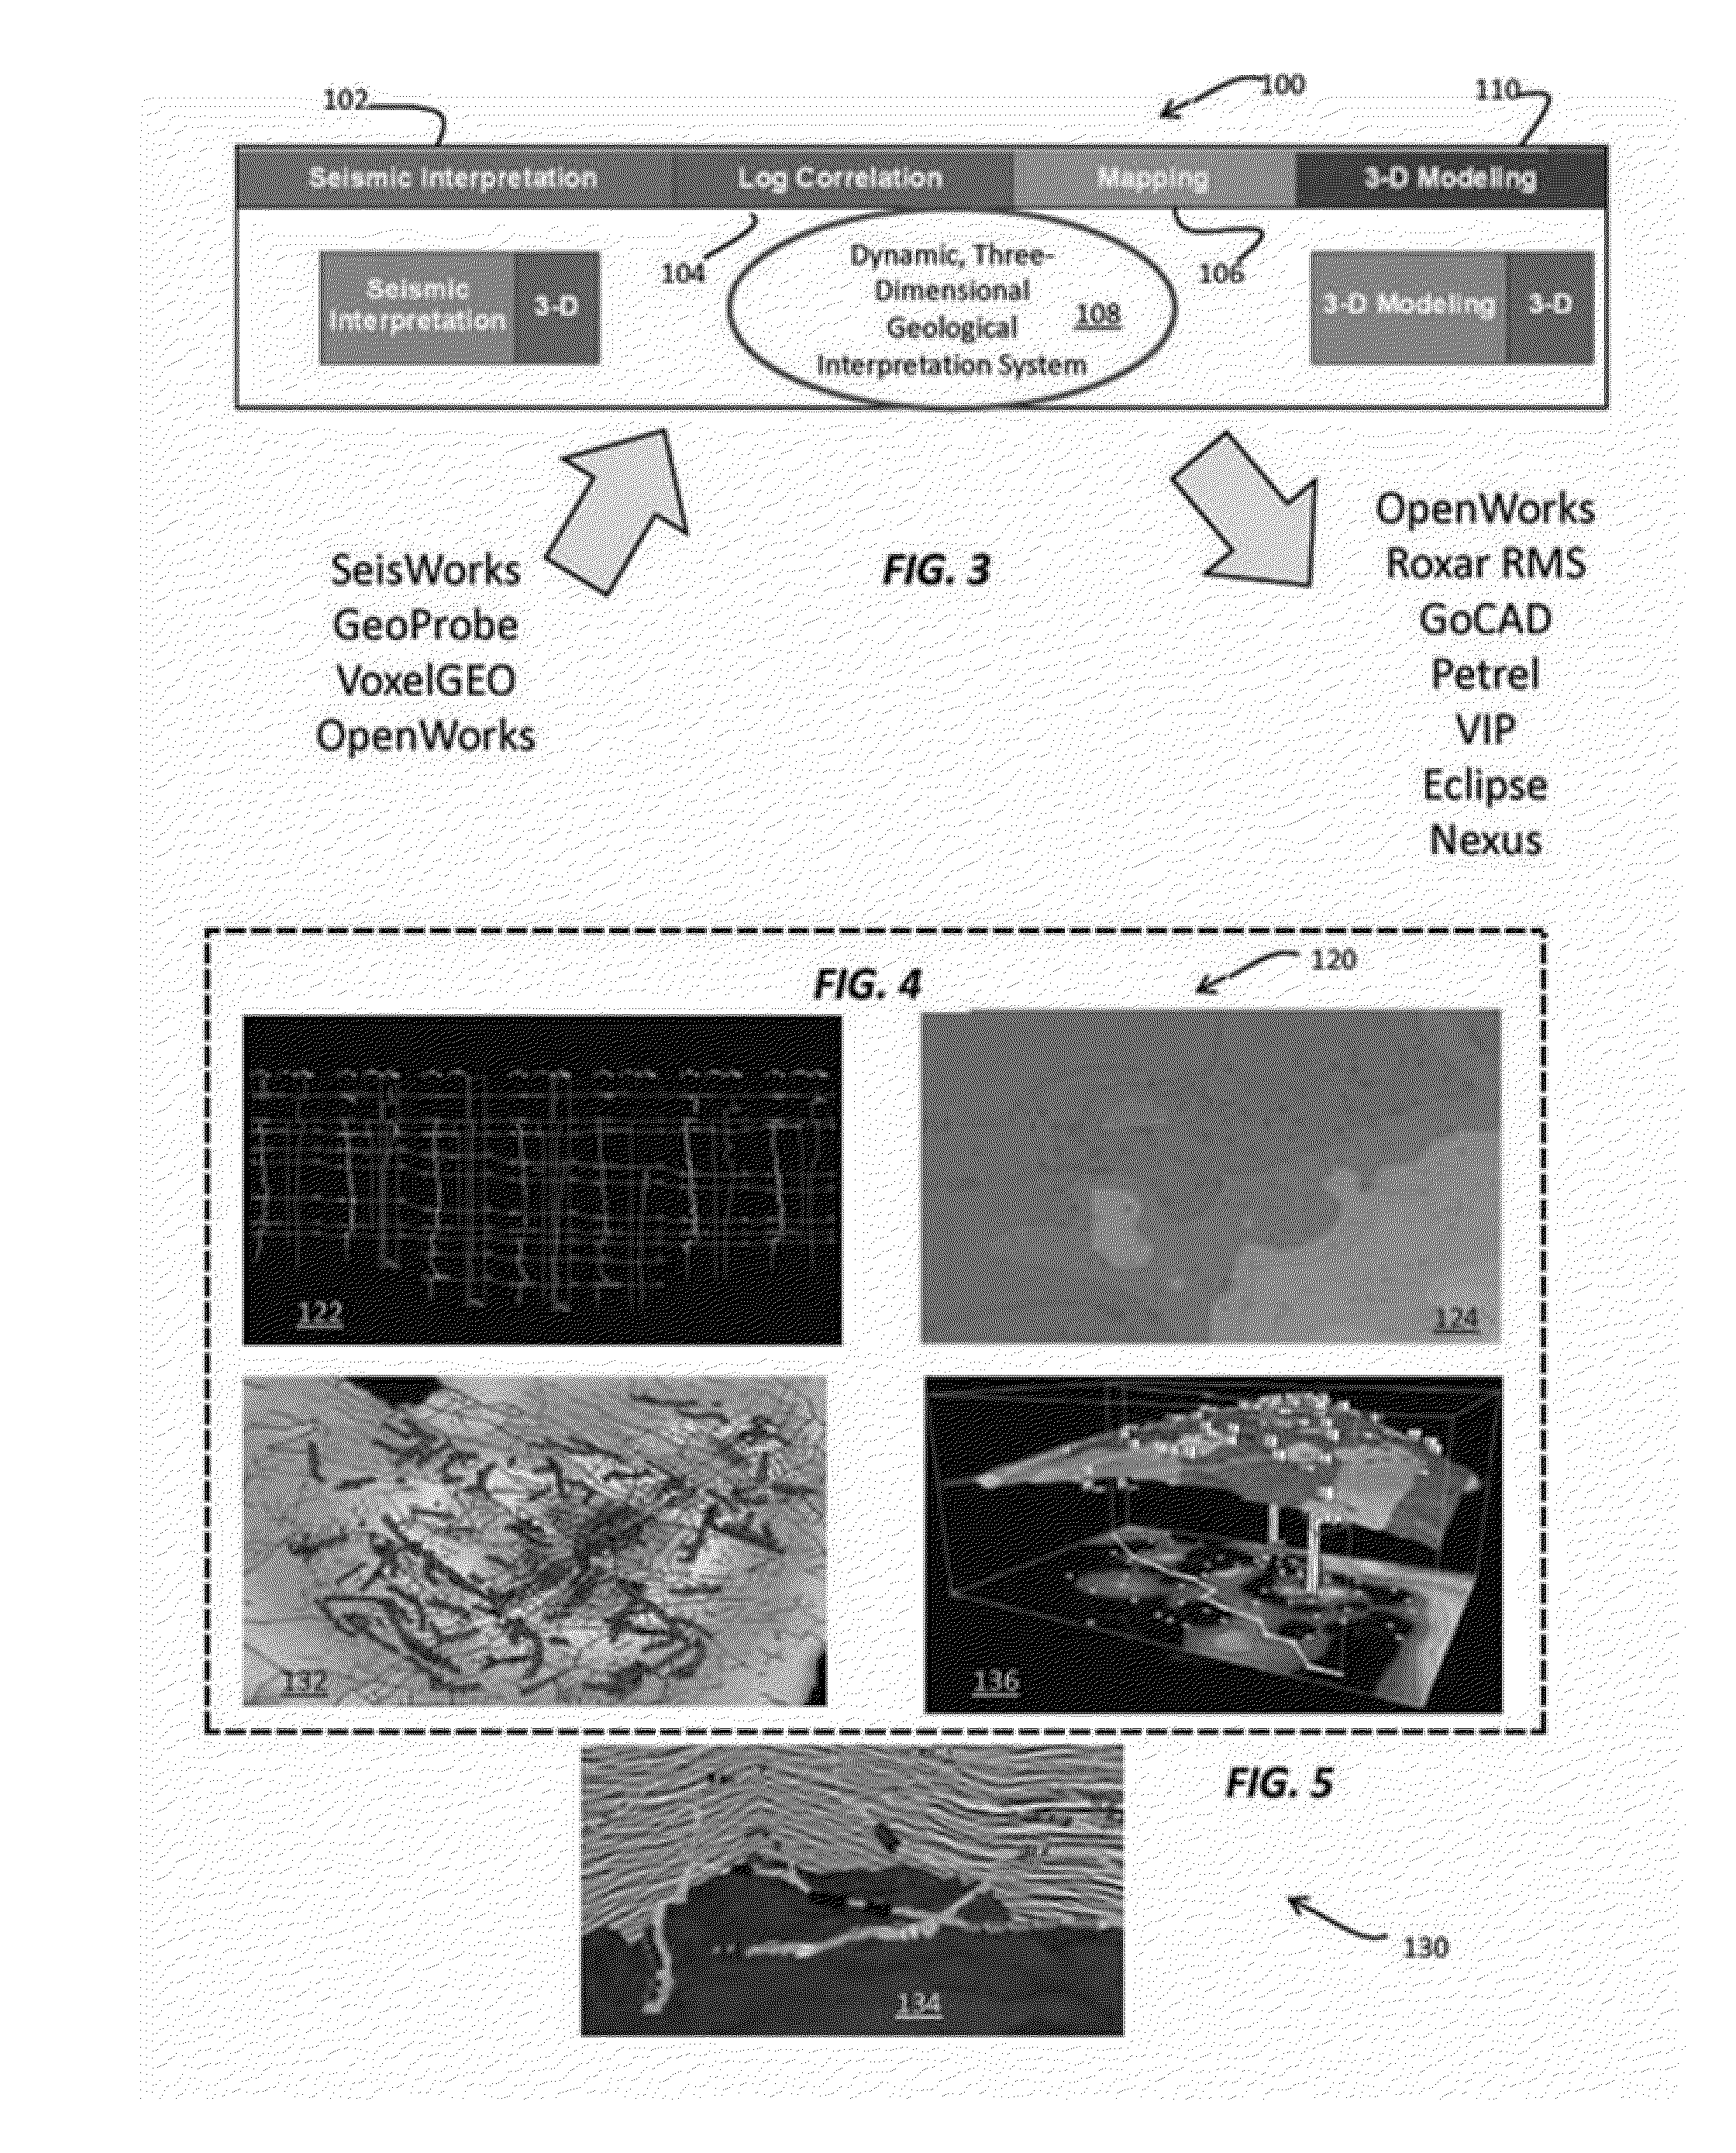 Method, system and computer readable medium for scenario mangement of dynamic, three-dimensional geological interpretation and modeling